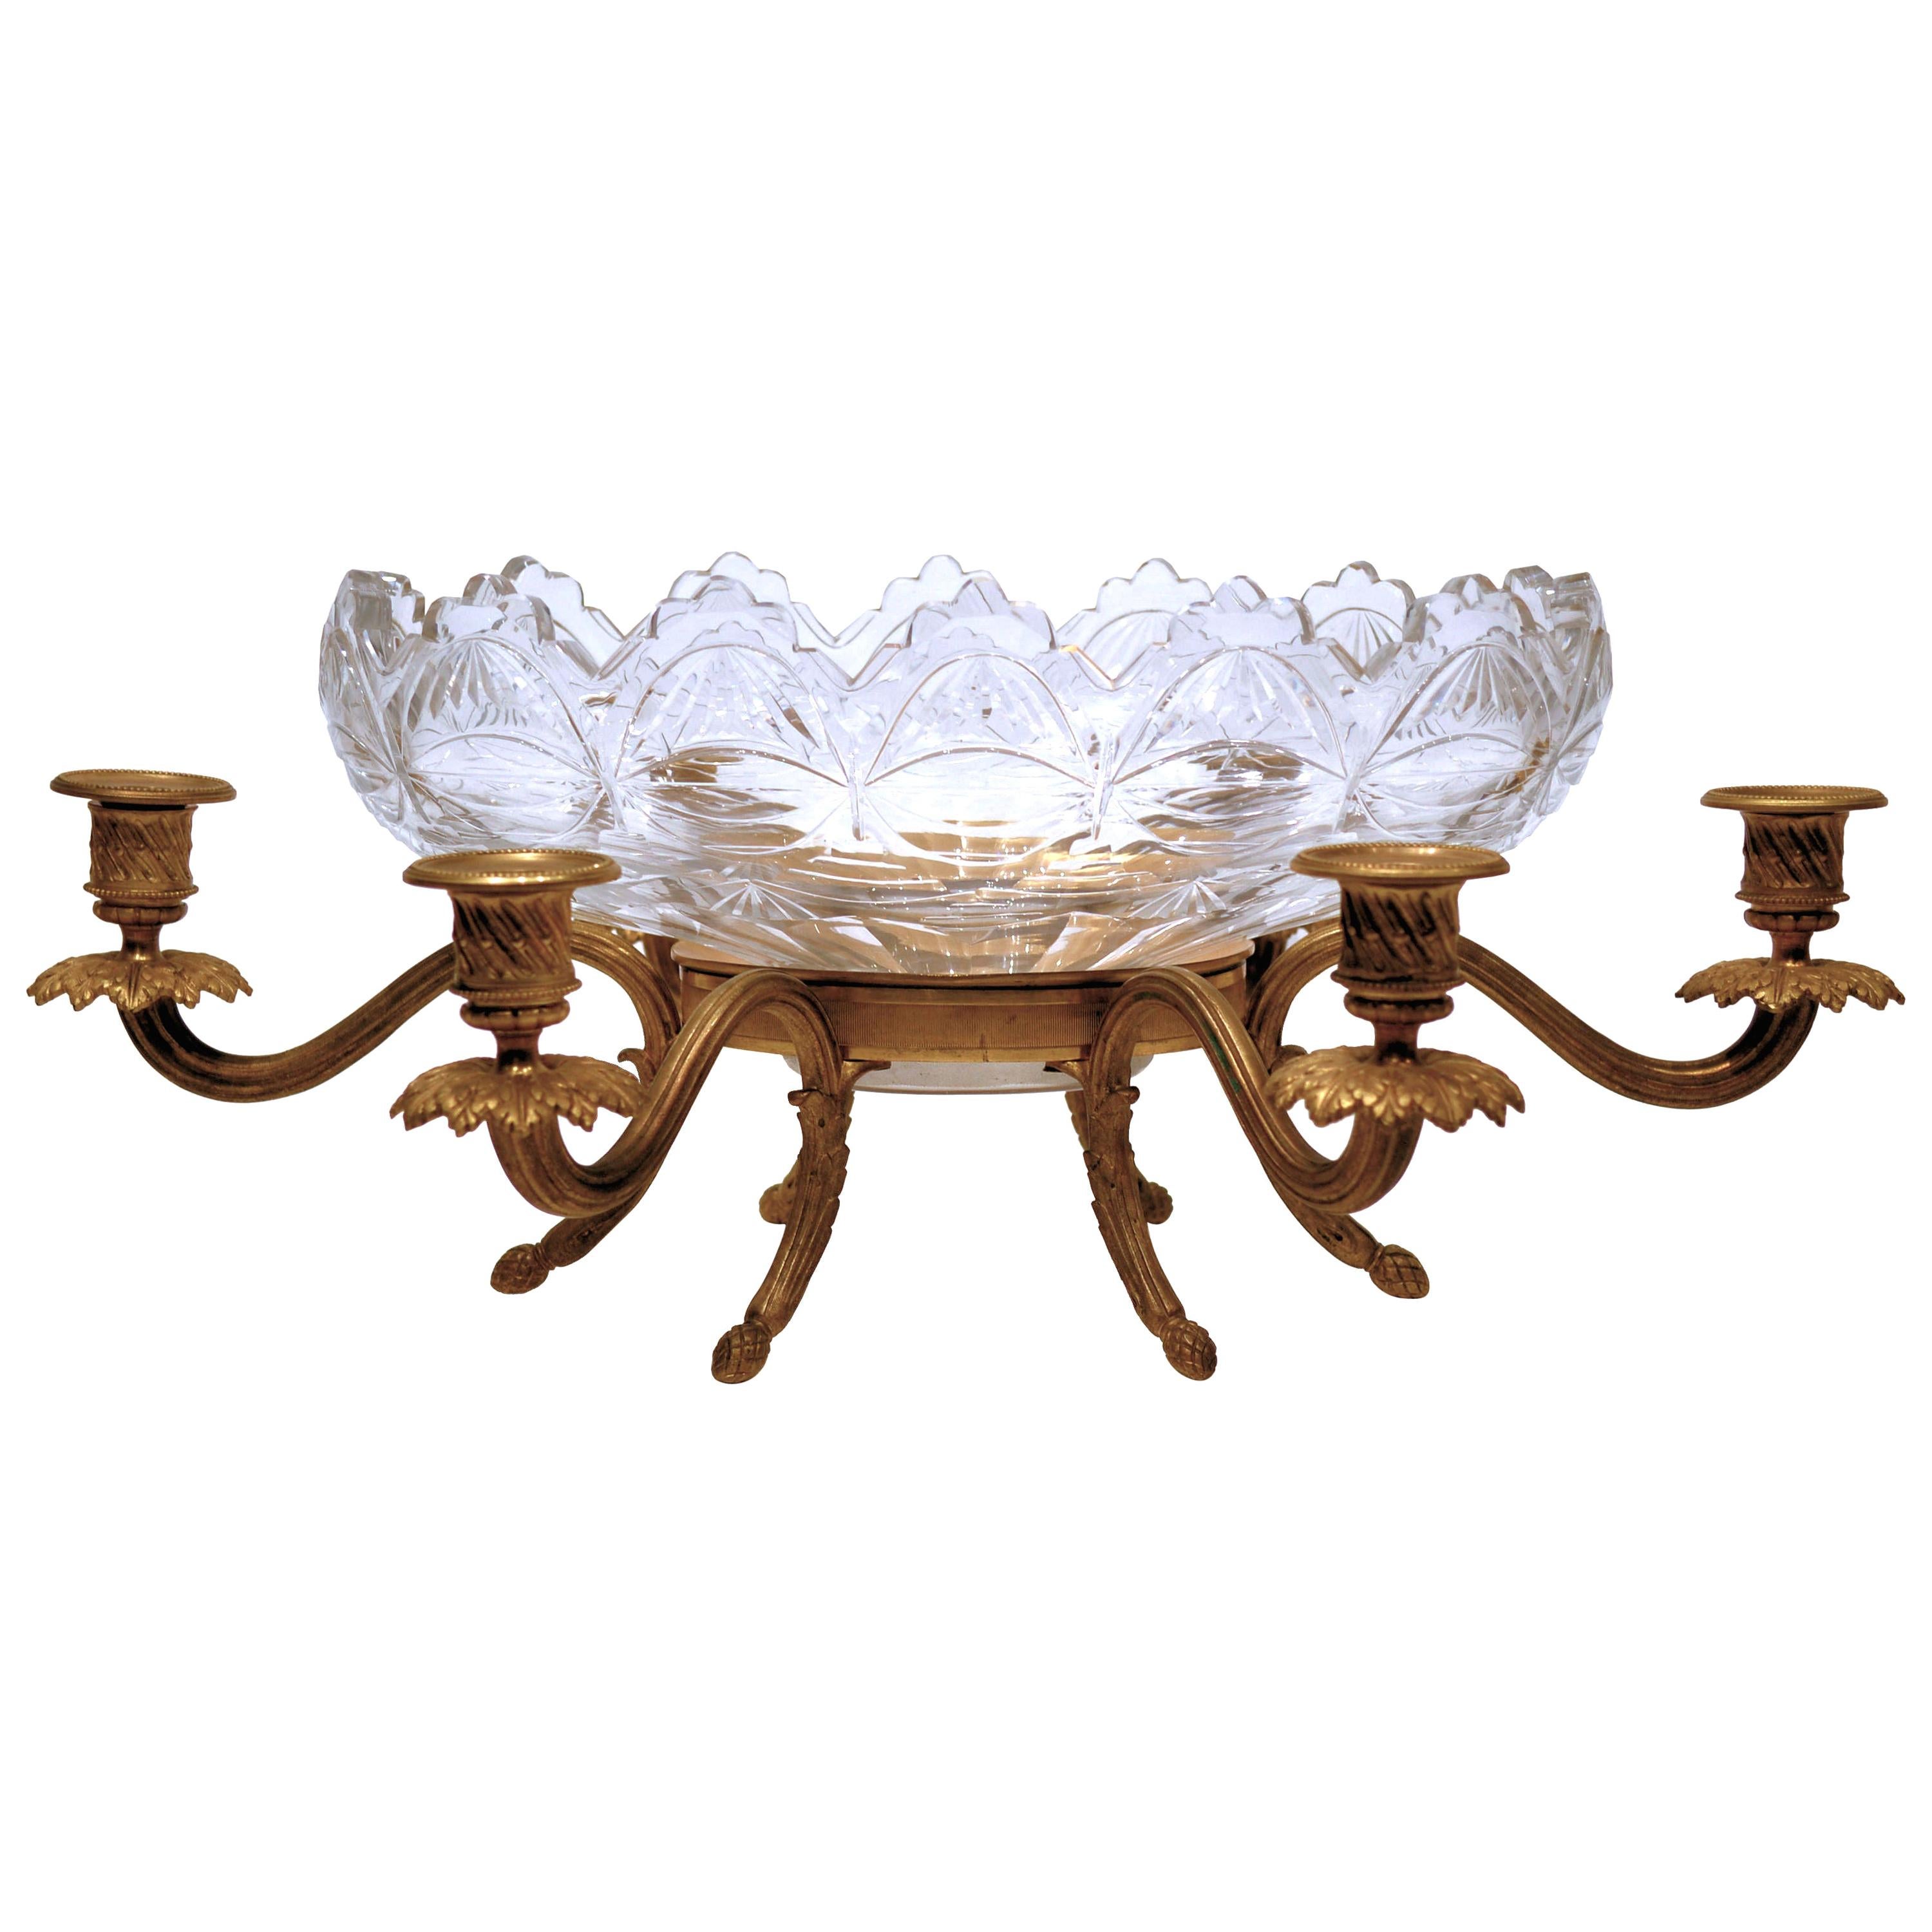 French 19th Century Gilt Bronze and Cut Crystal Glass Centerpiece Candelabra For Sale